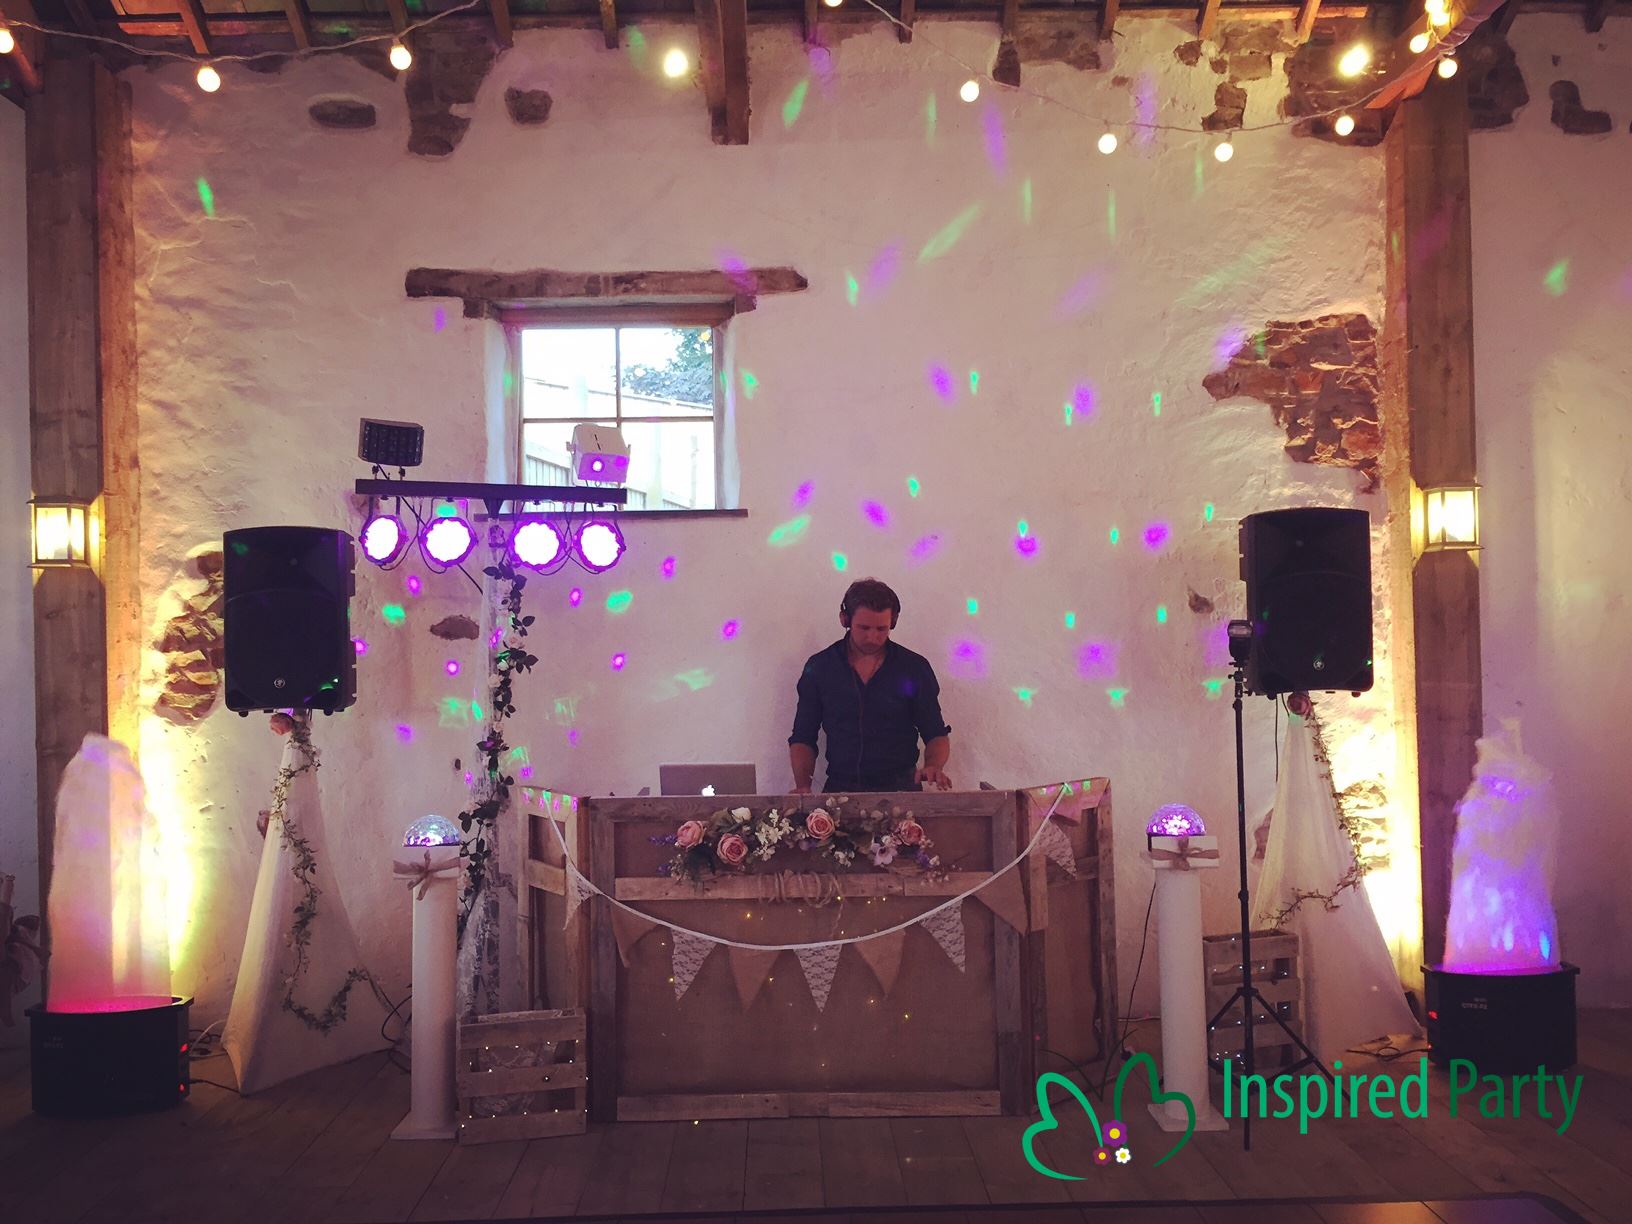 inspired Party - wedding venues cornwall